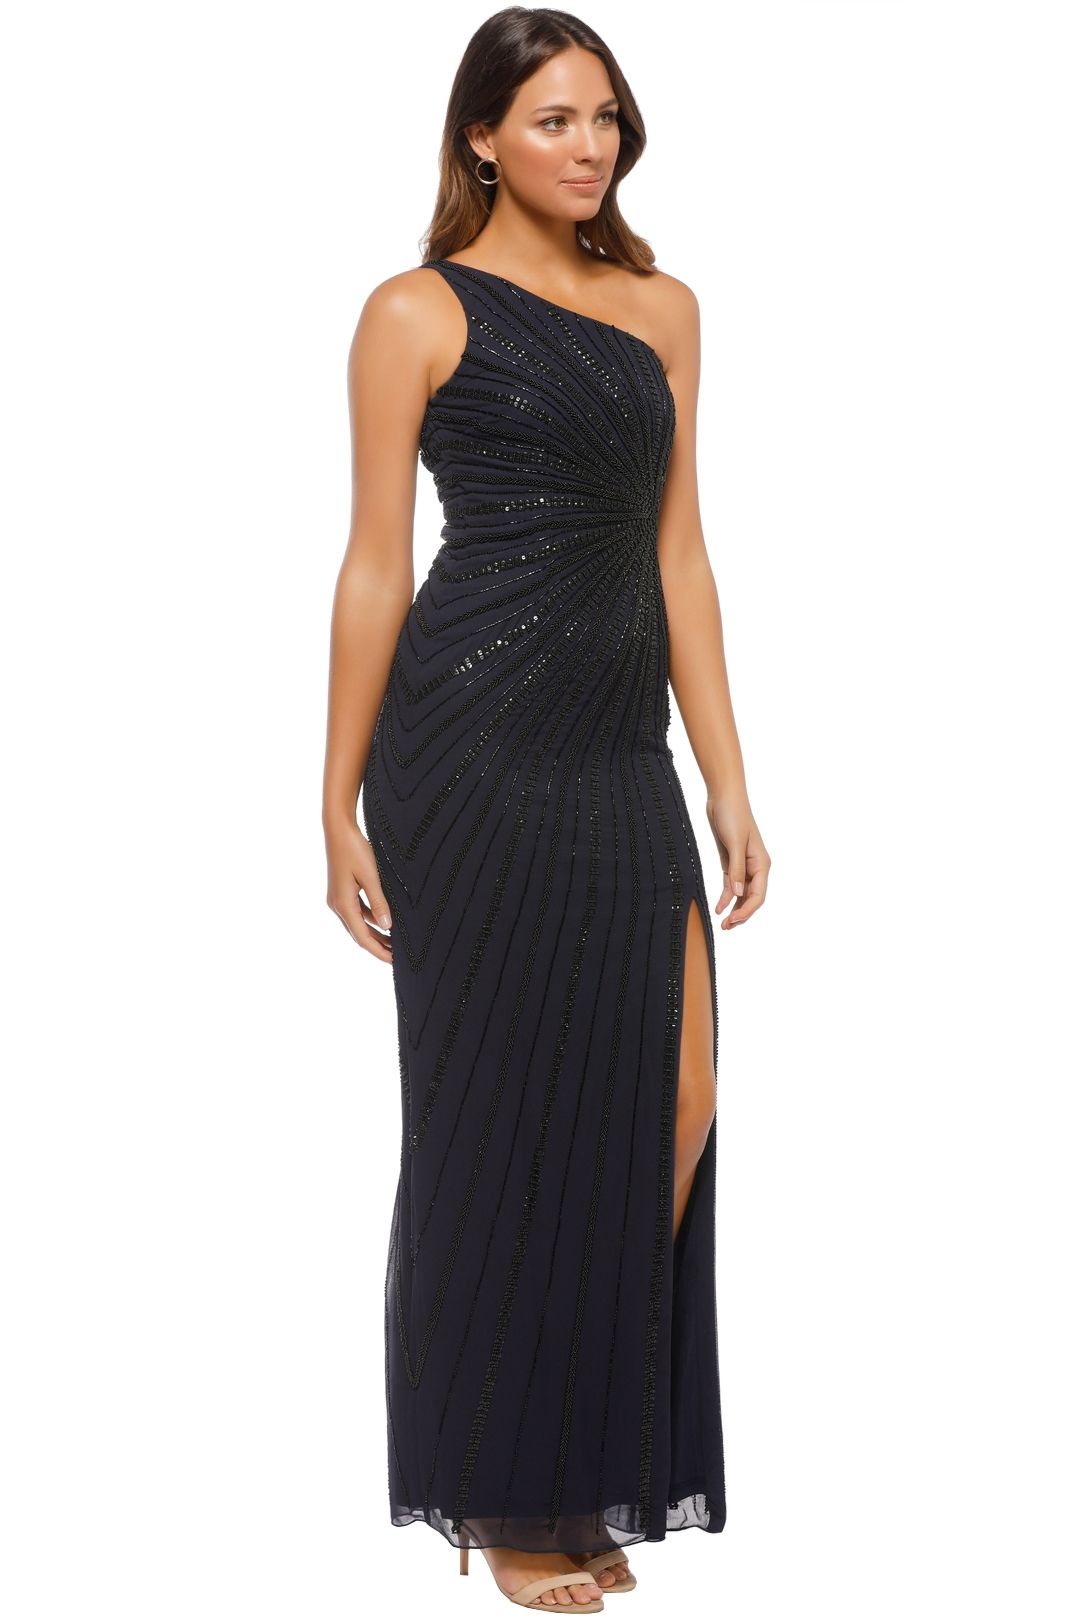 Adrianna Papell - One Shoulder Long Dress - Side